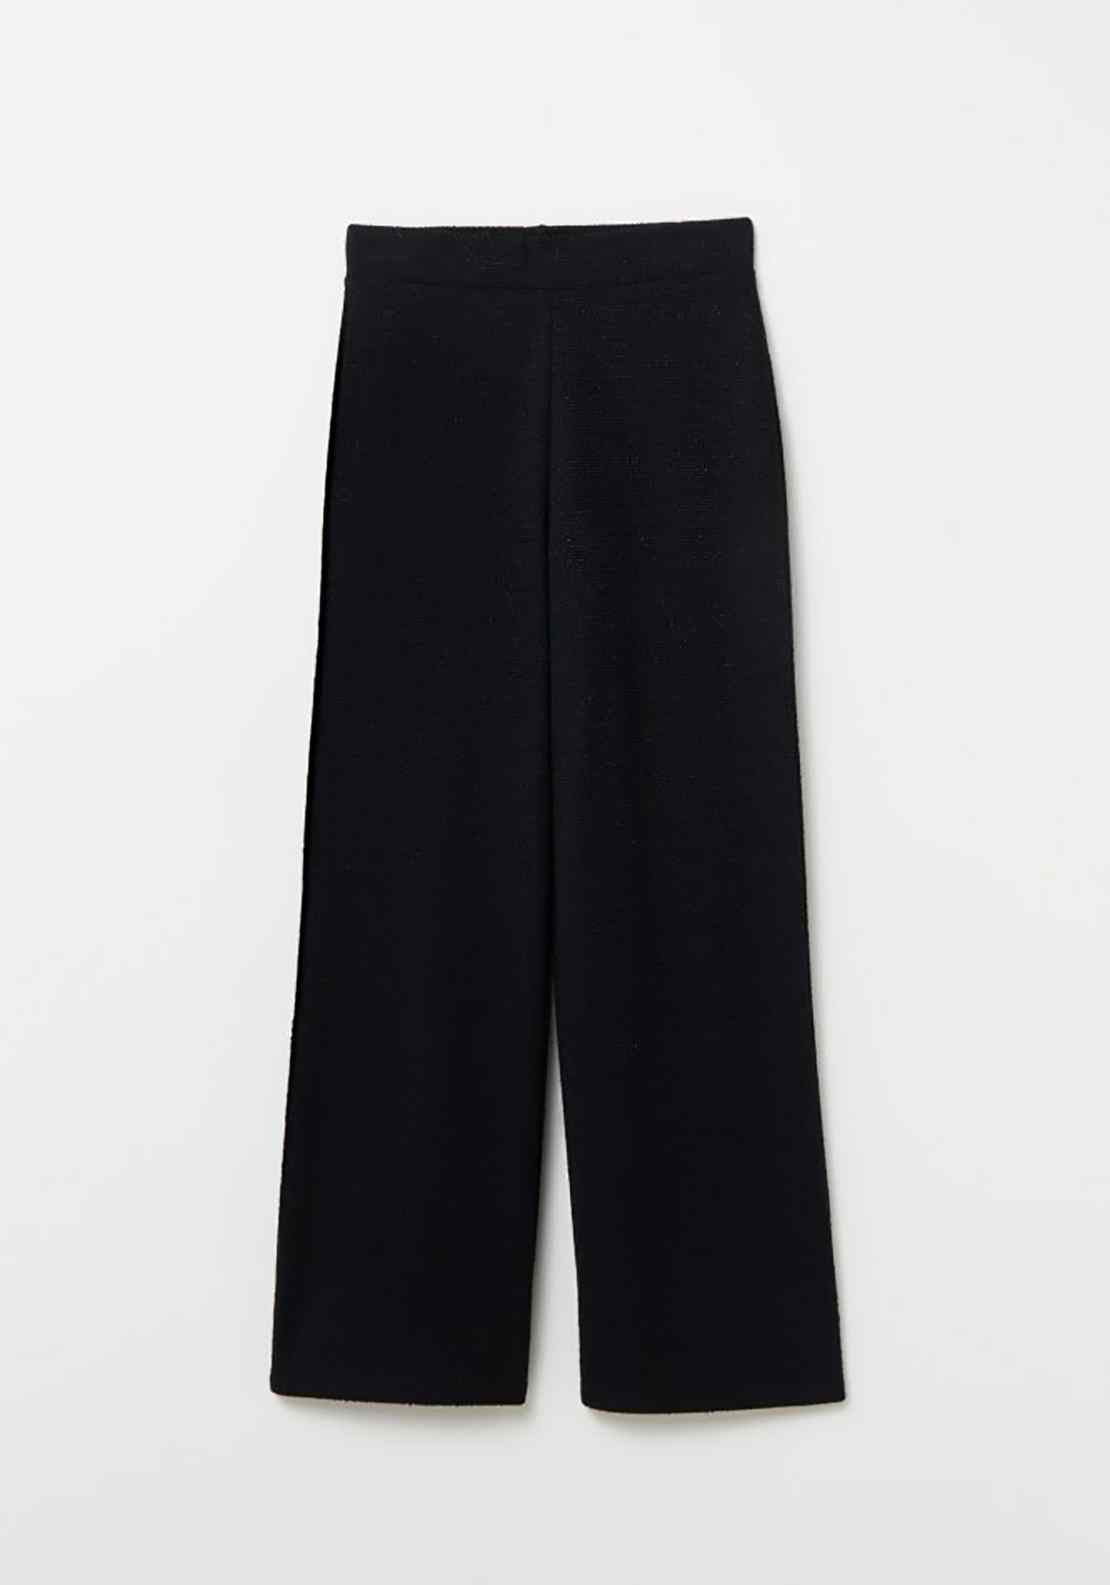 Sfera Long Textured Trousers - Black 6 Shaws Department Stores